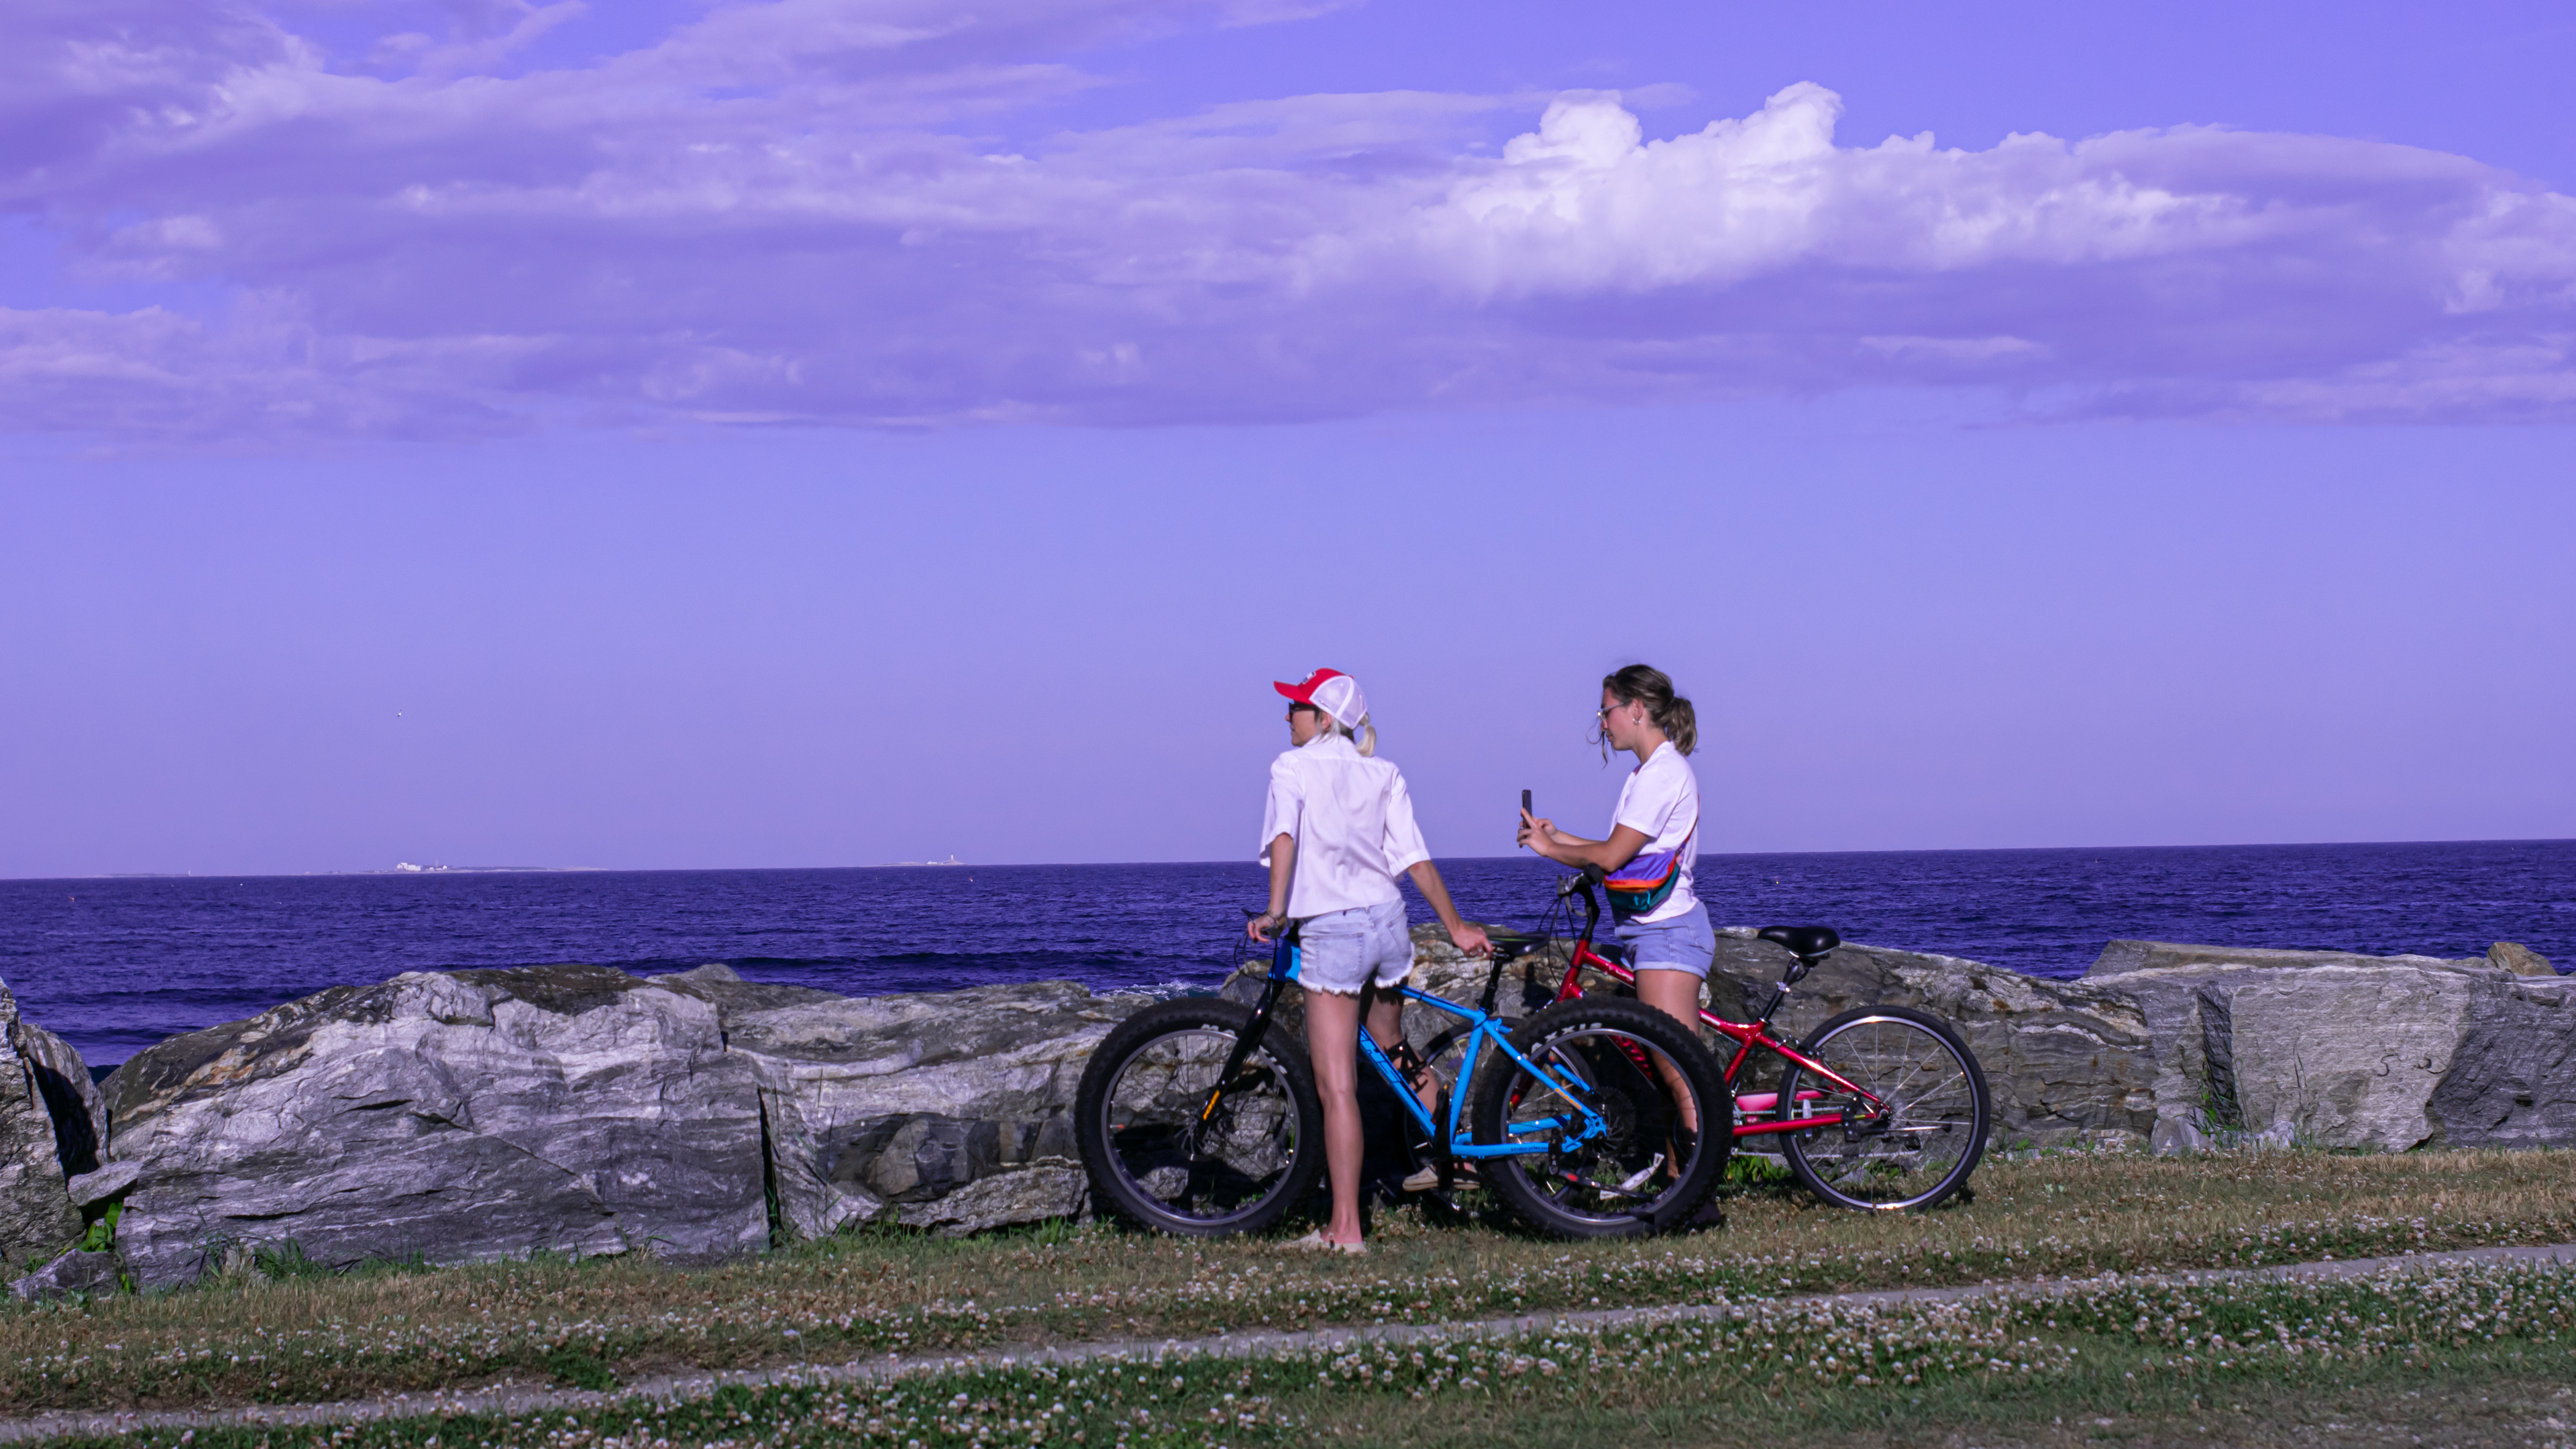 Sea Looking Into The Distance Bicycle Jean Shorts White Tops Red Hats Taking Photo 3840x2160